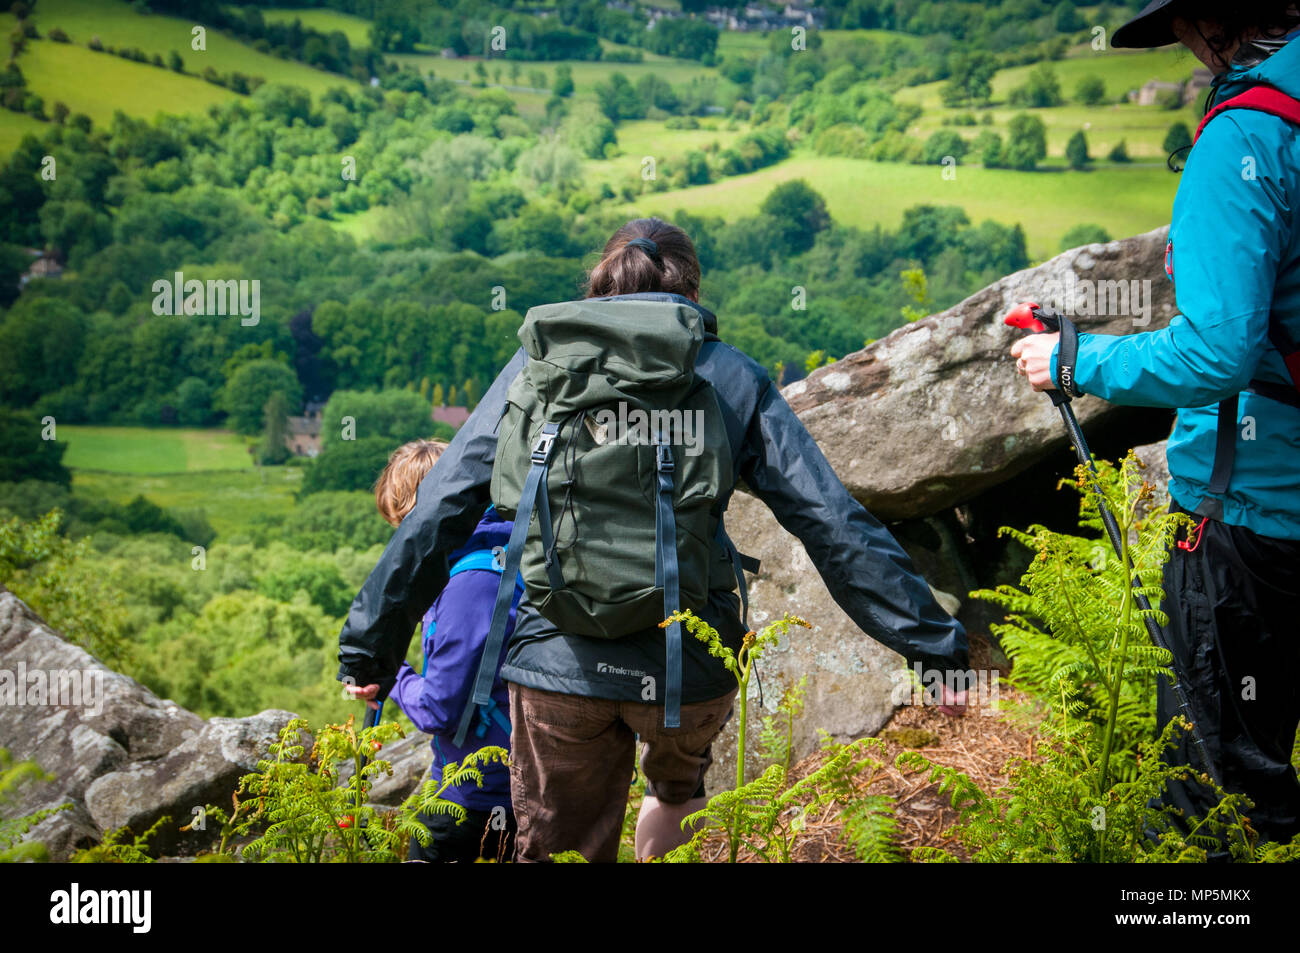 Hikers in countryside Stock Photo